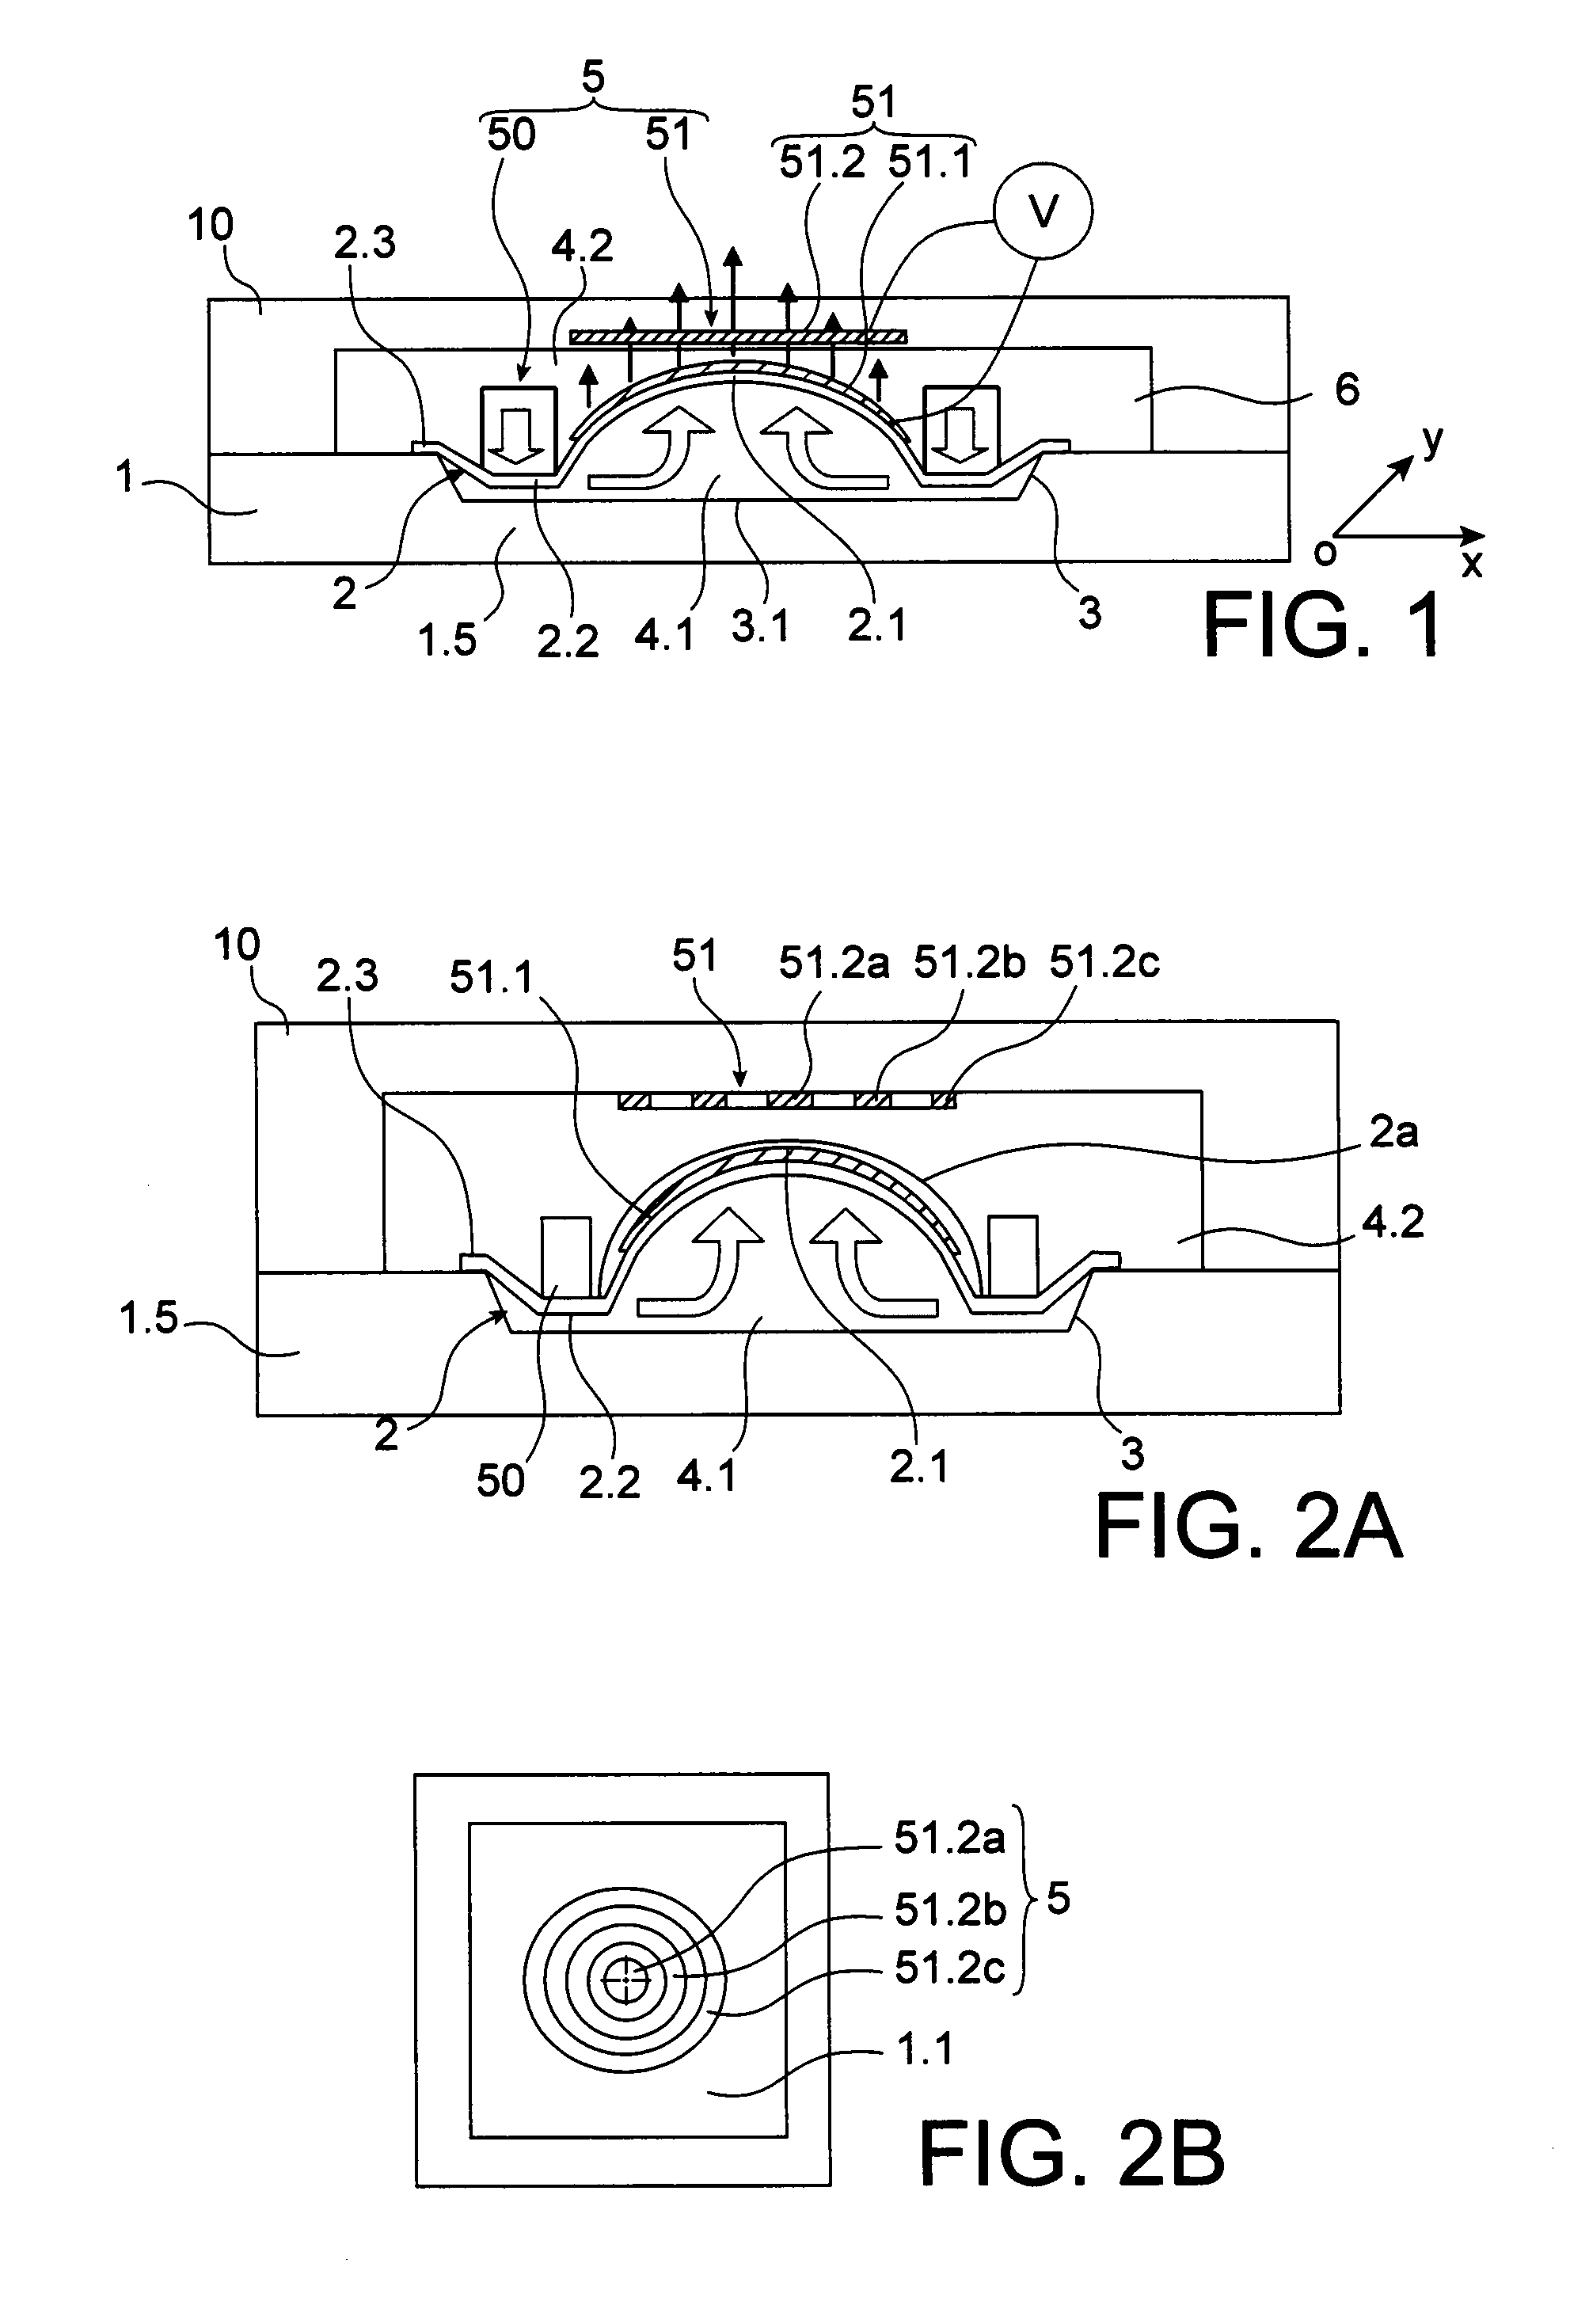 Membrane deformable optical device having improved actuation